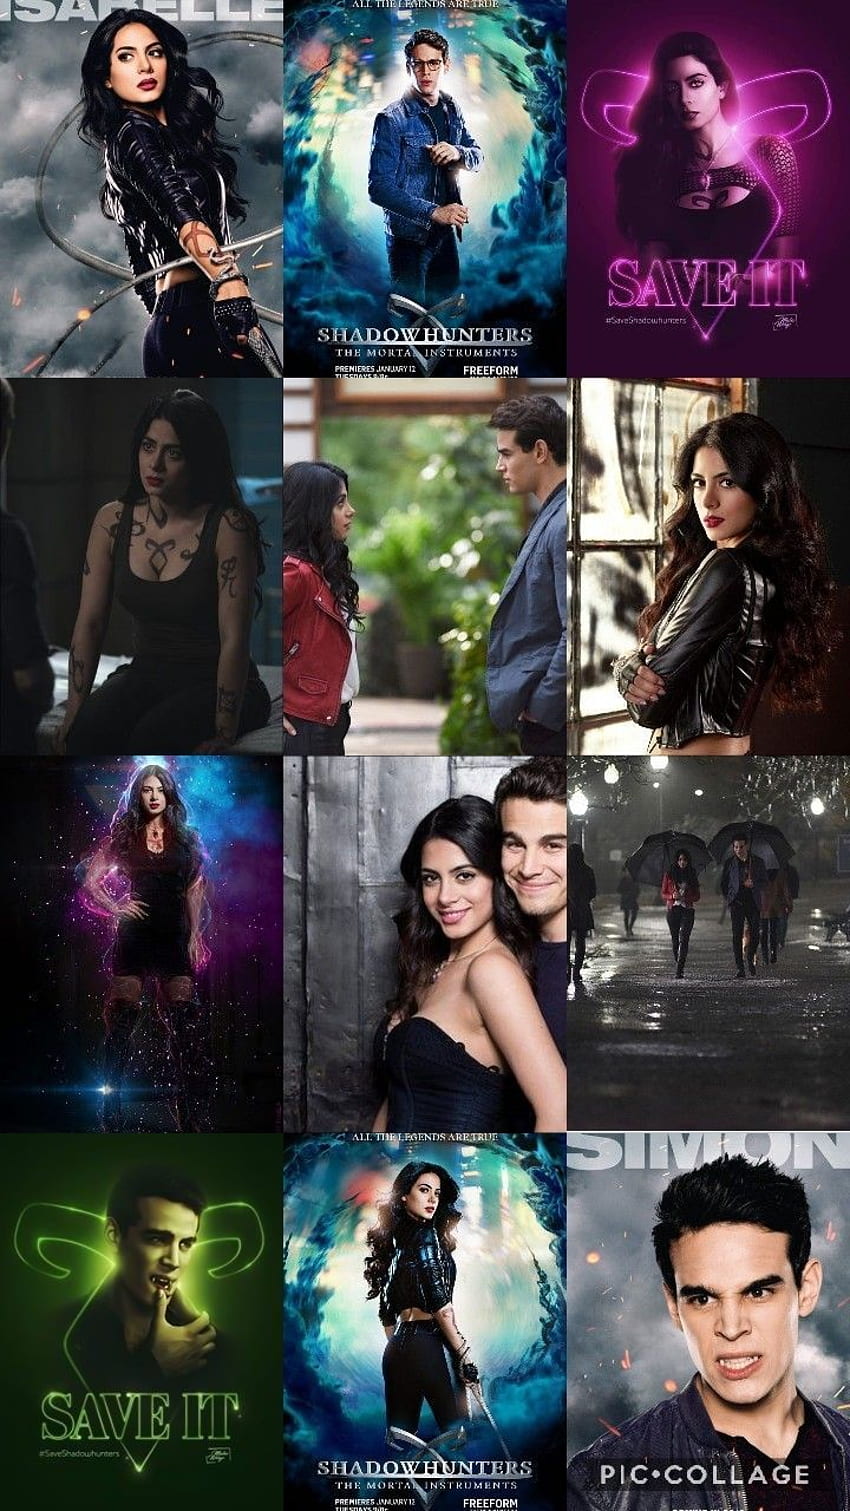 Sizzy . Shadow hunters, Shadowhunters, Cassandra clare books, Alec Lightwood HD phone wallpaper